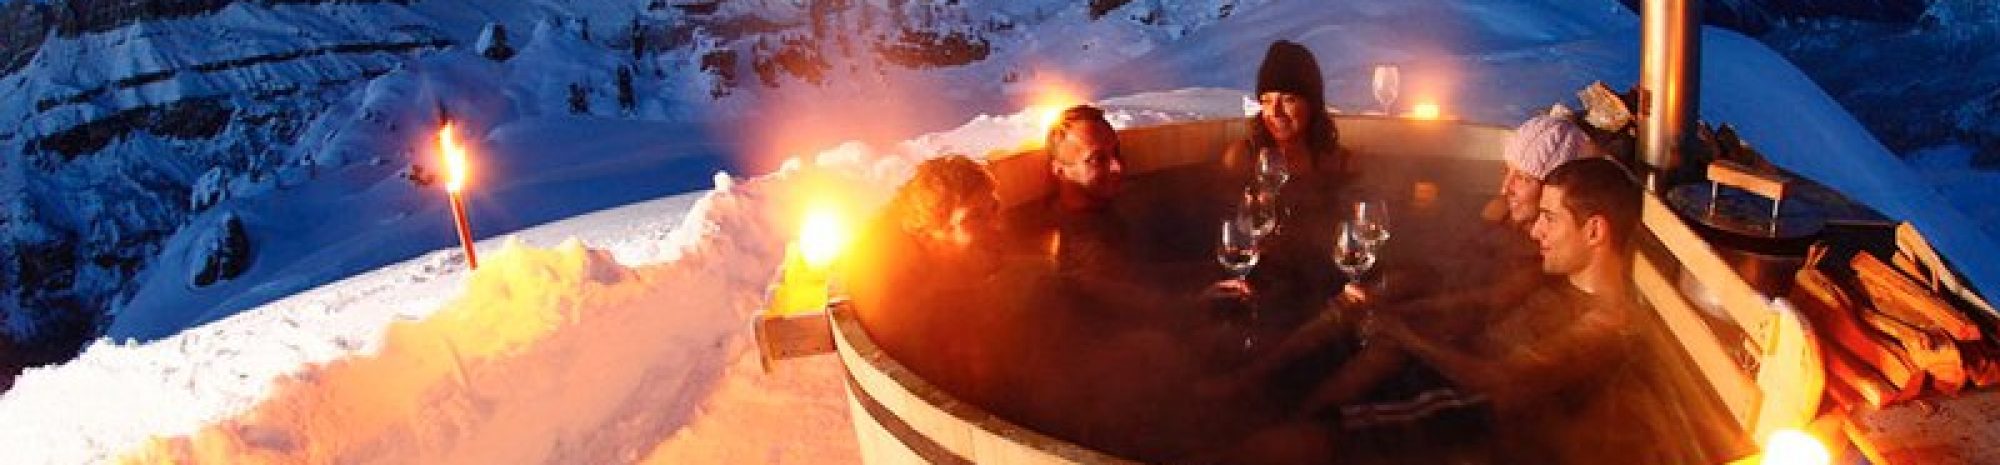 5 jacuzzis ayant une vue incroyable